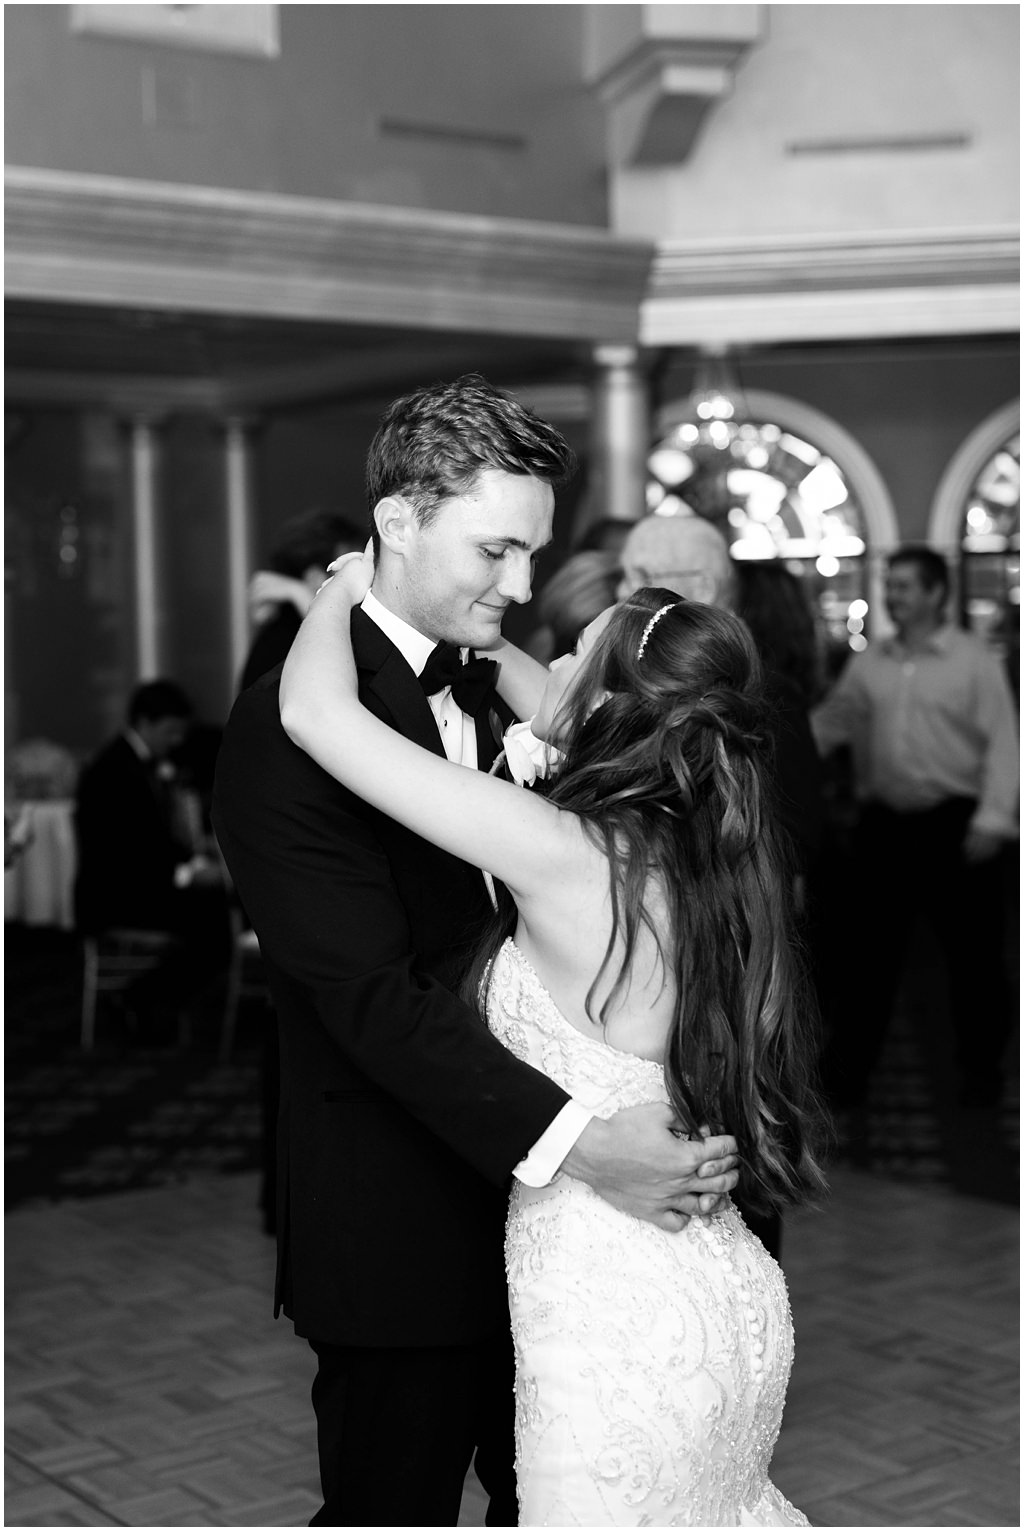 Tampa Safety Harbour Wedding Reception | Bride And Groom First Dance | Grant Hemond & Associates